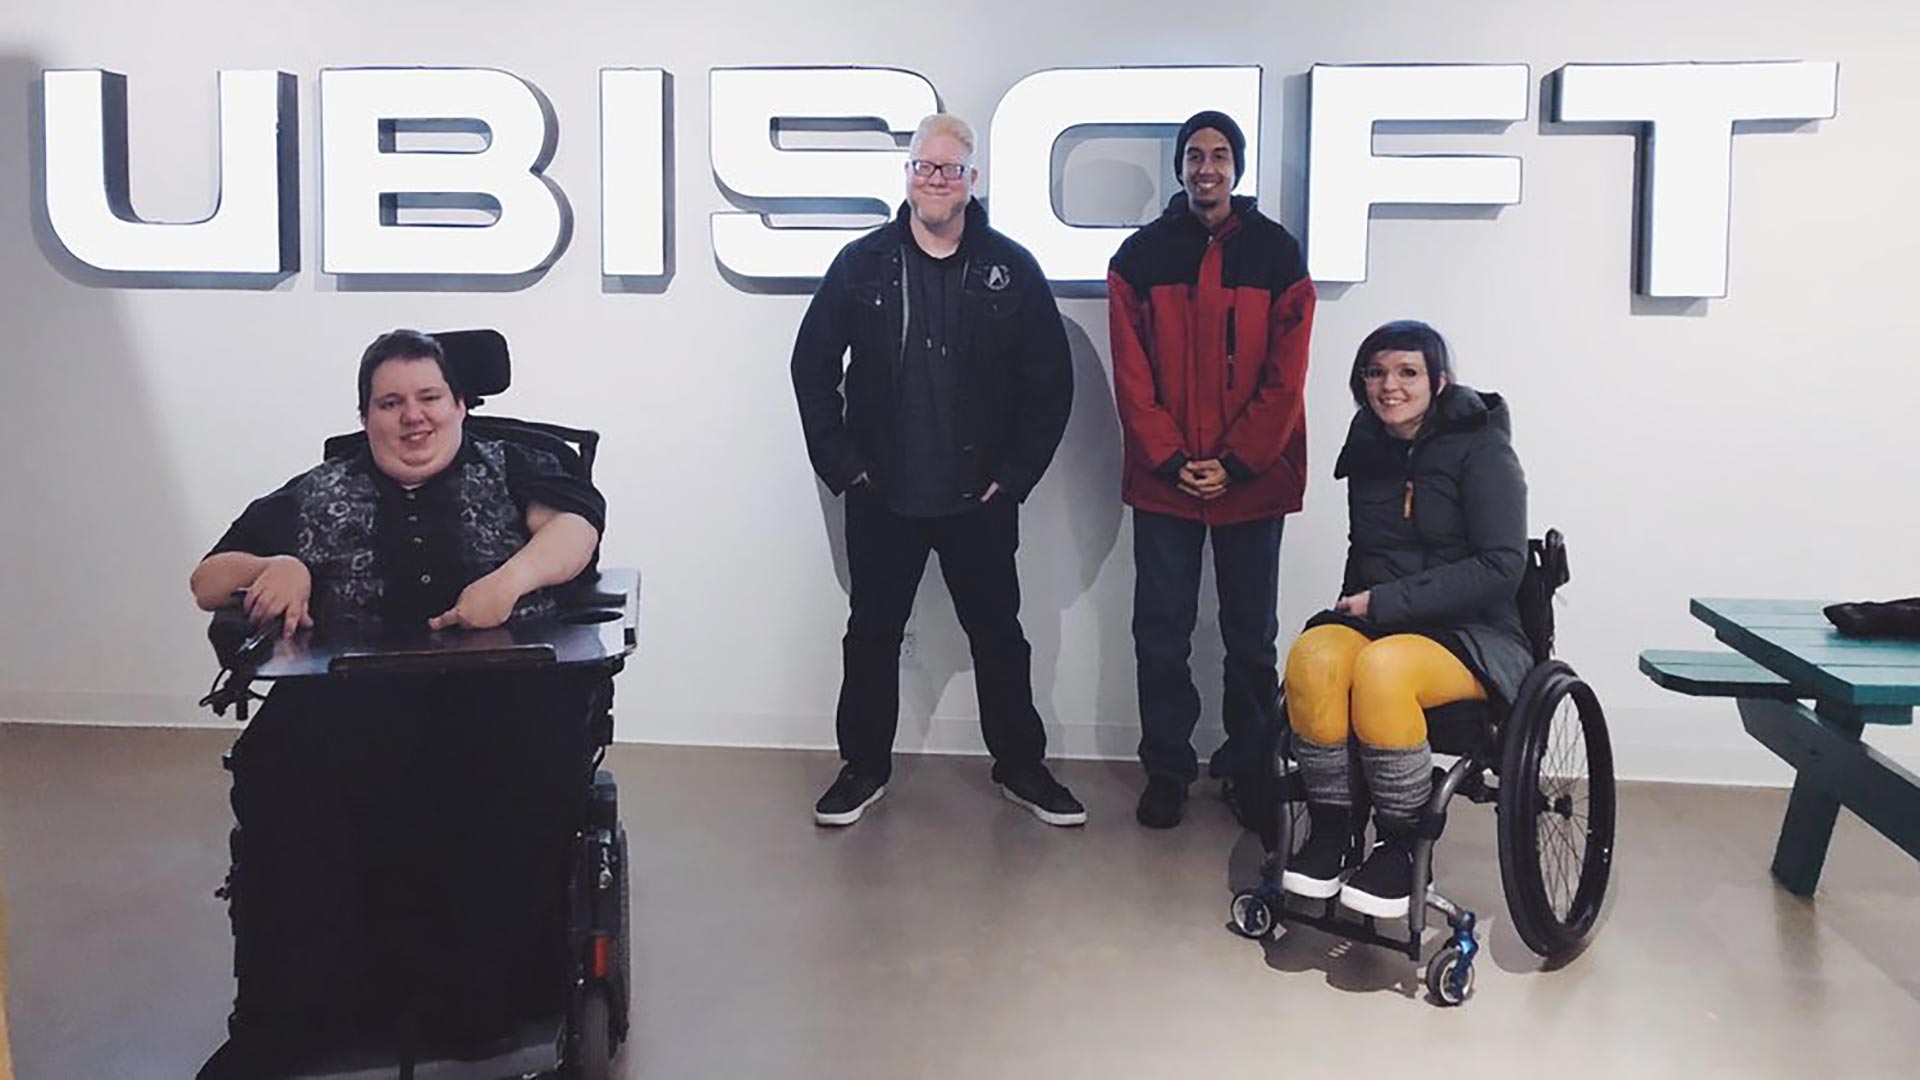 Steve Saylor and other accessibility consultants in a Ubisoft office